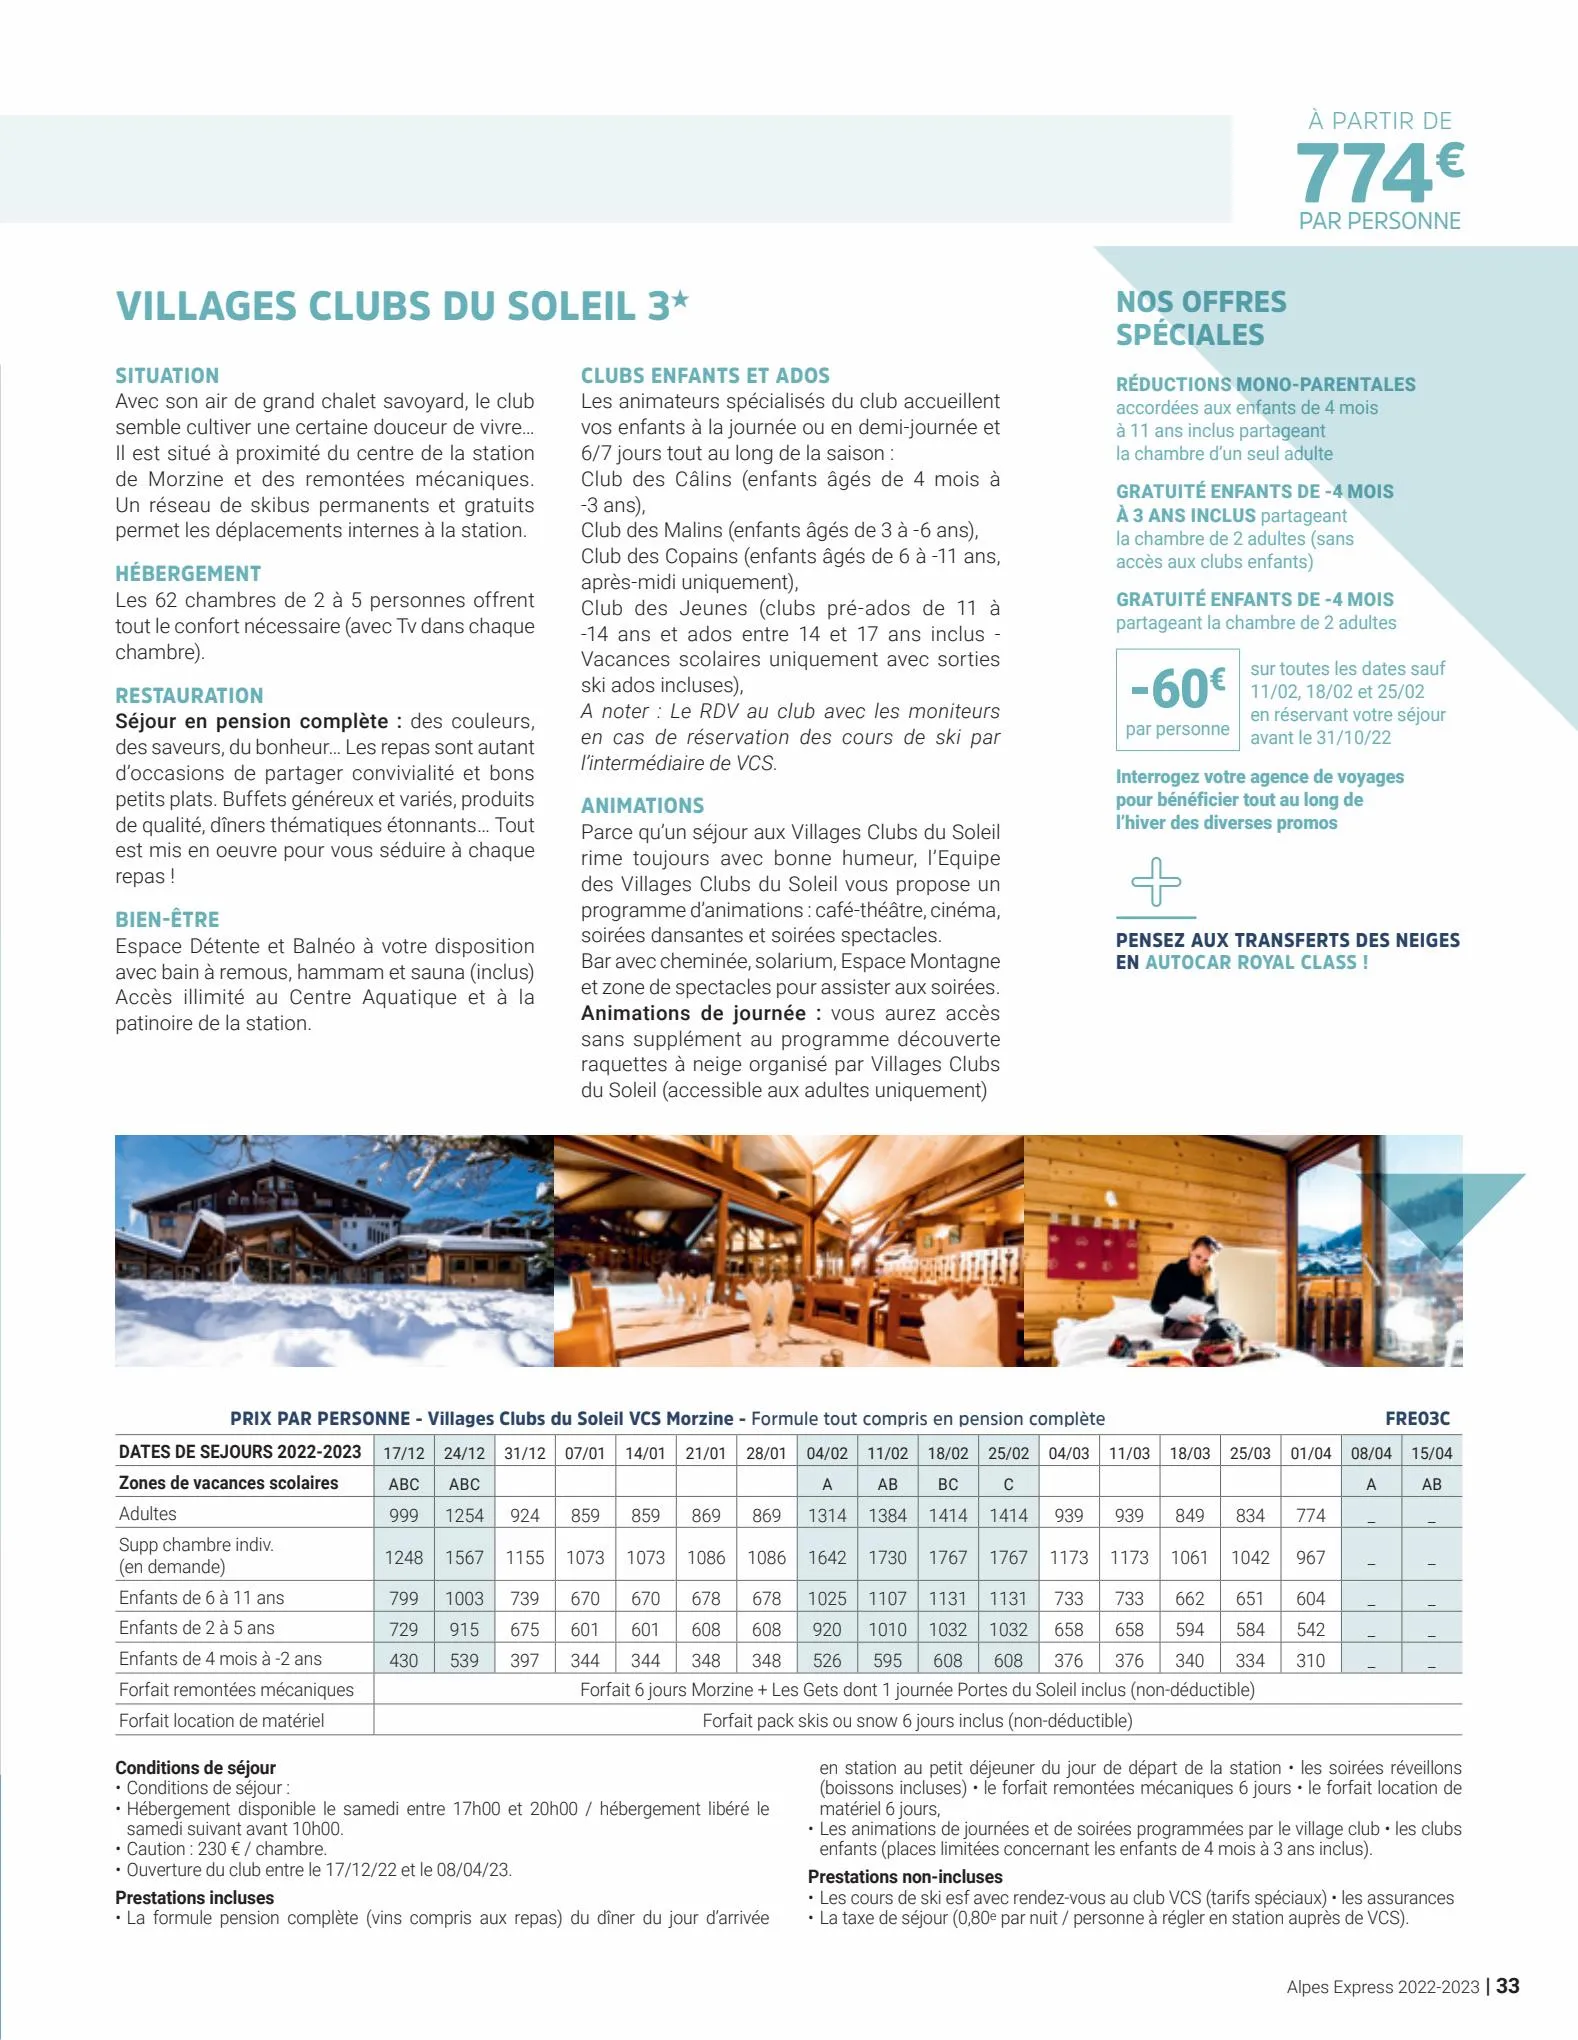 Catalogue Alpes Express - Hiver 2022-2023, page 00033